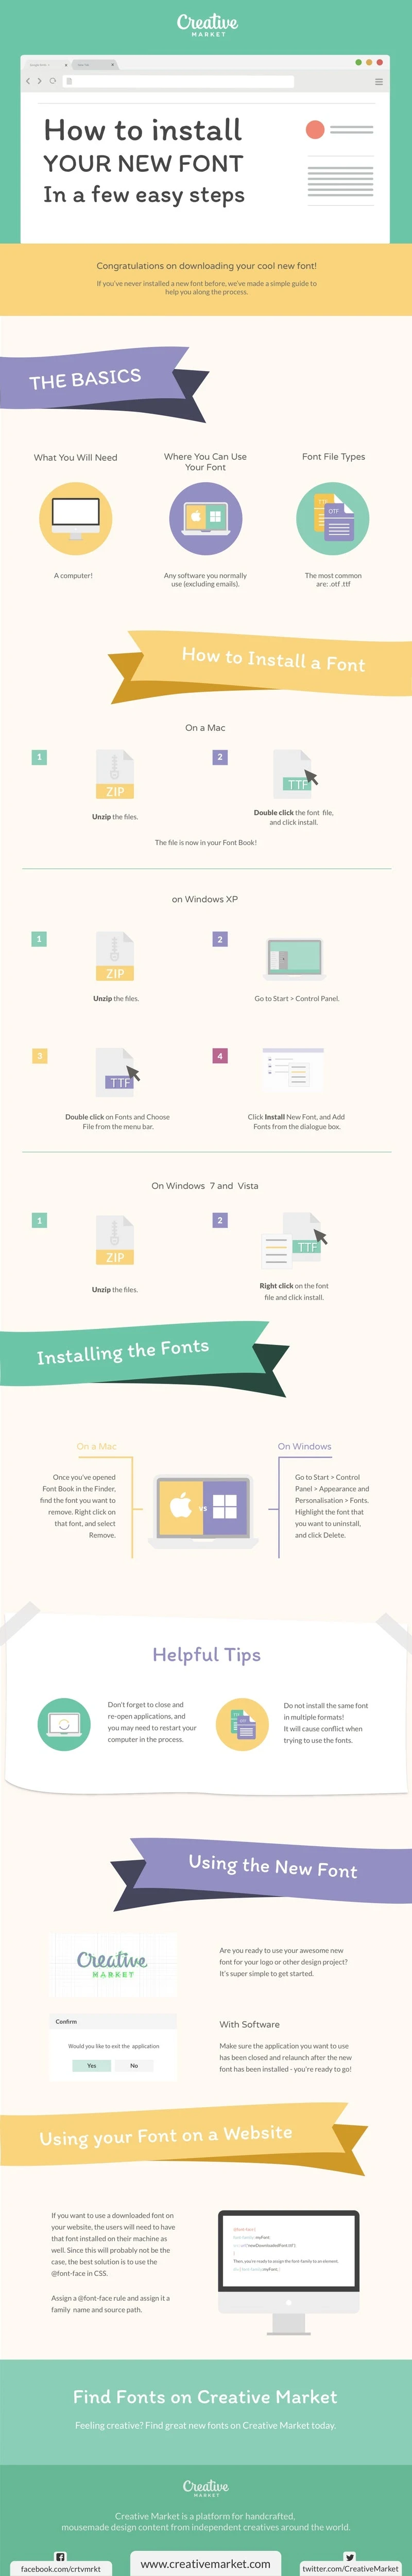 How to Install Your New Font in a Few Easy Steps - #infographic